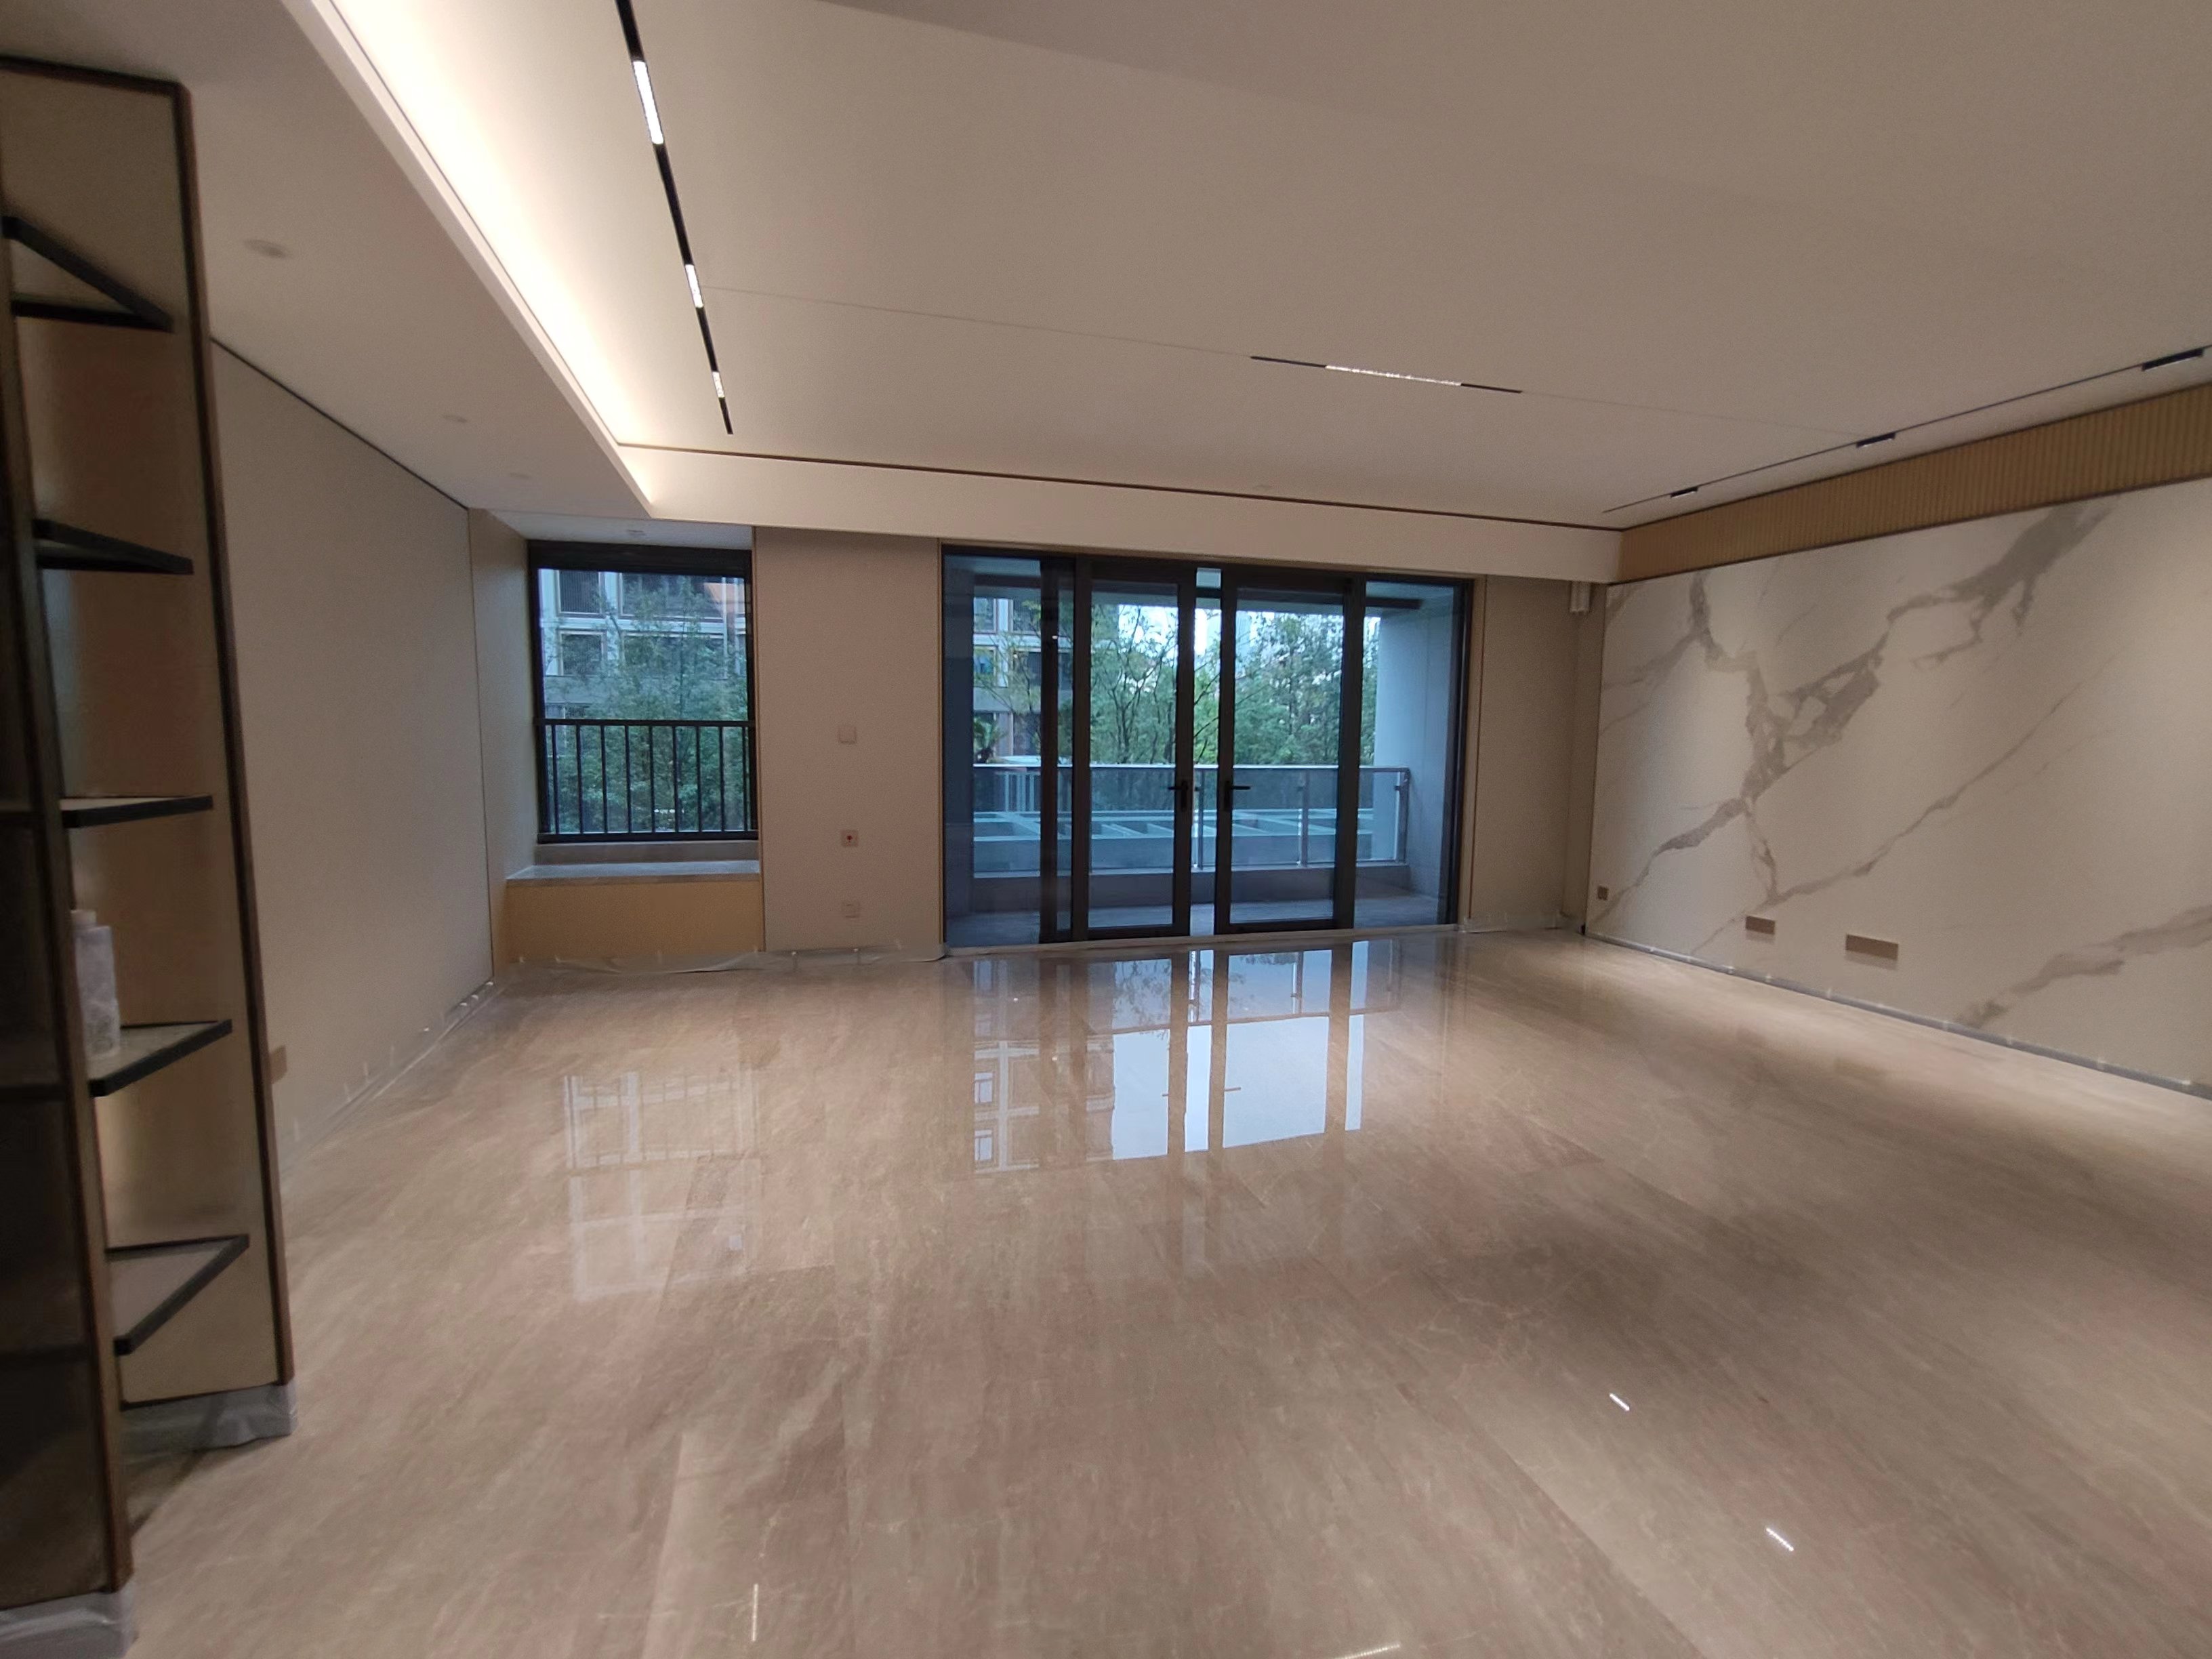 marble walls Brand-new High-end 3BR Riverside Apartment for Rent near Shanghai’s Lujiazui